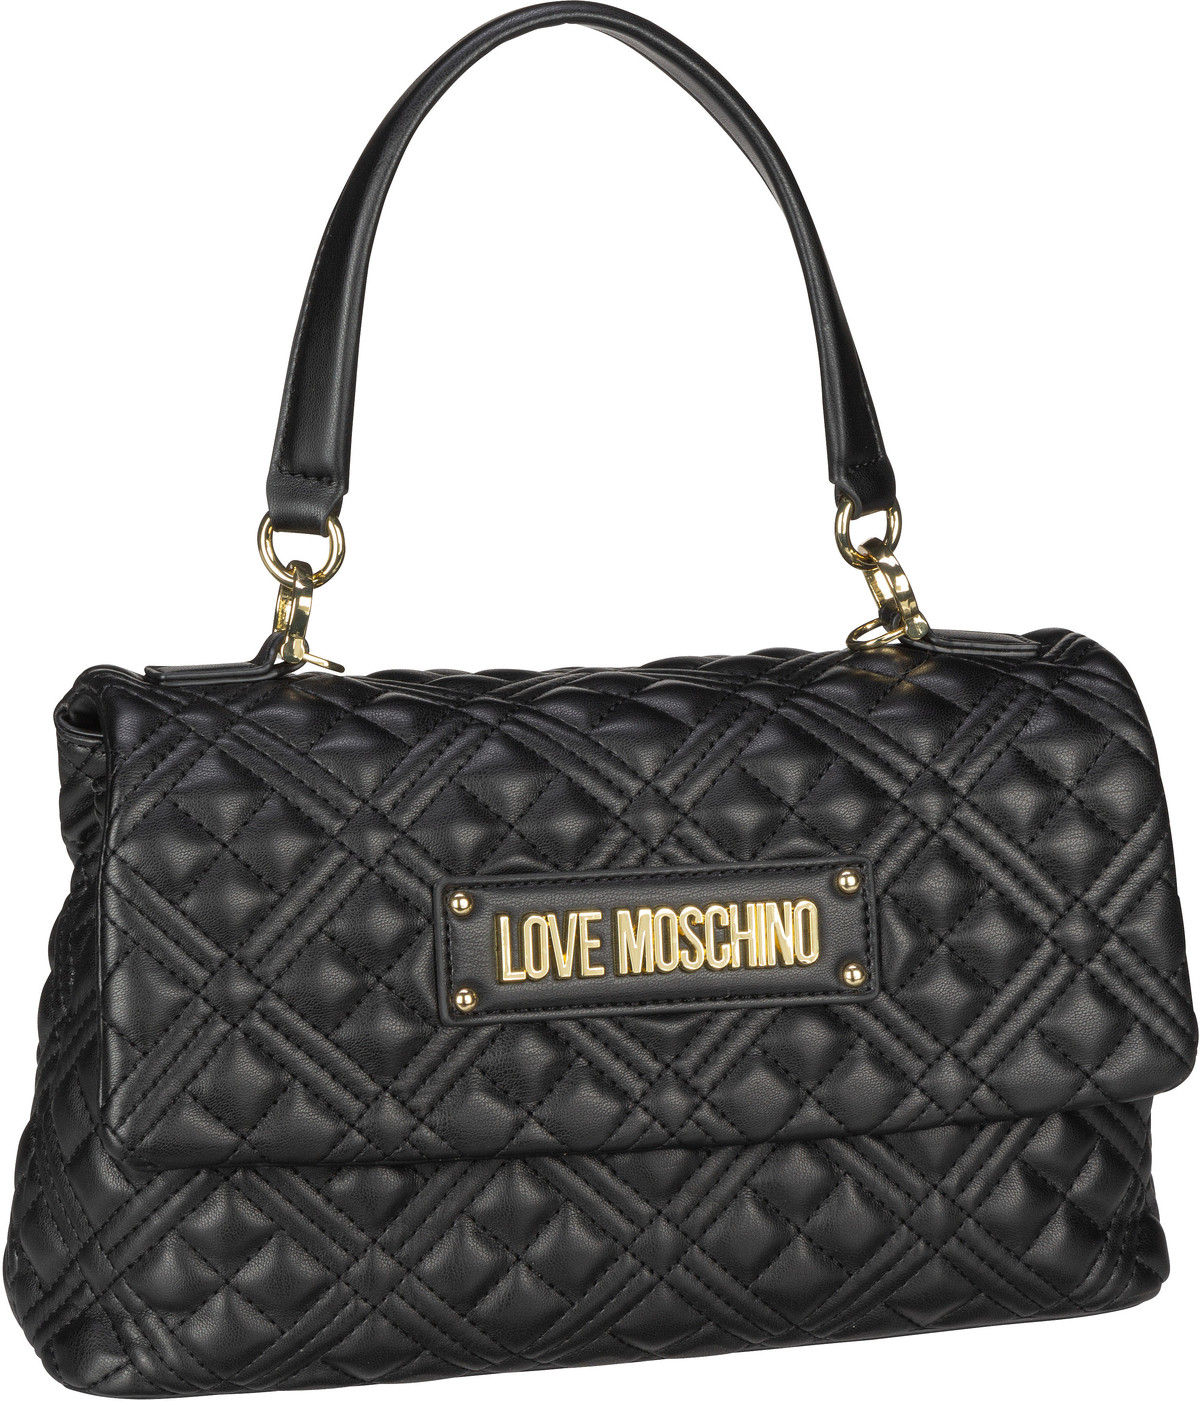 Love Moschino Quilted Bag 4314 - Black